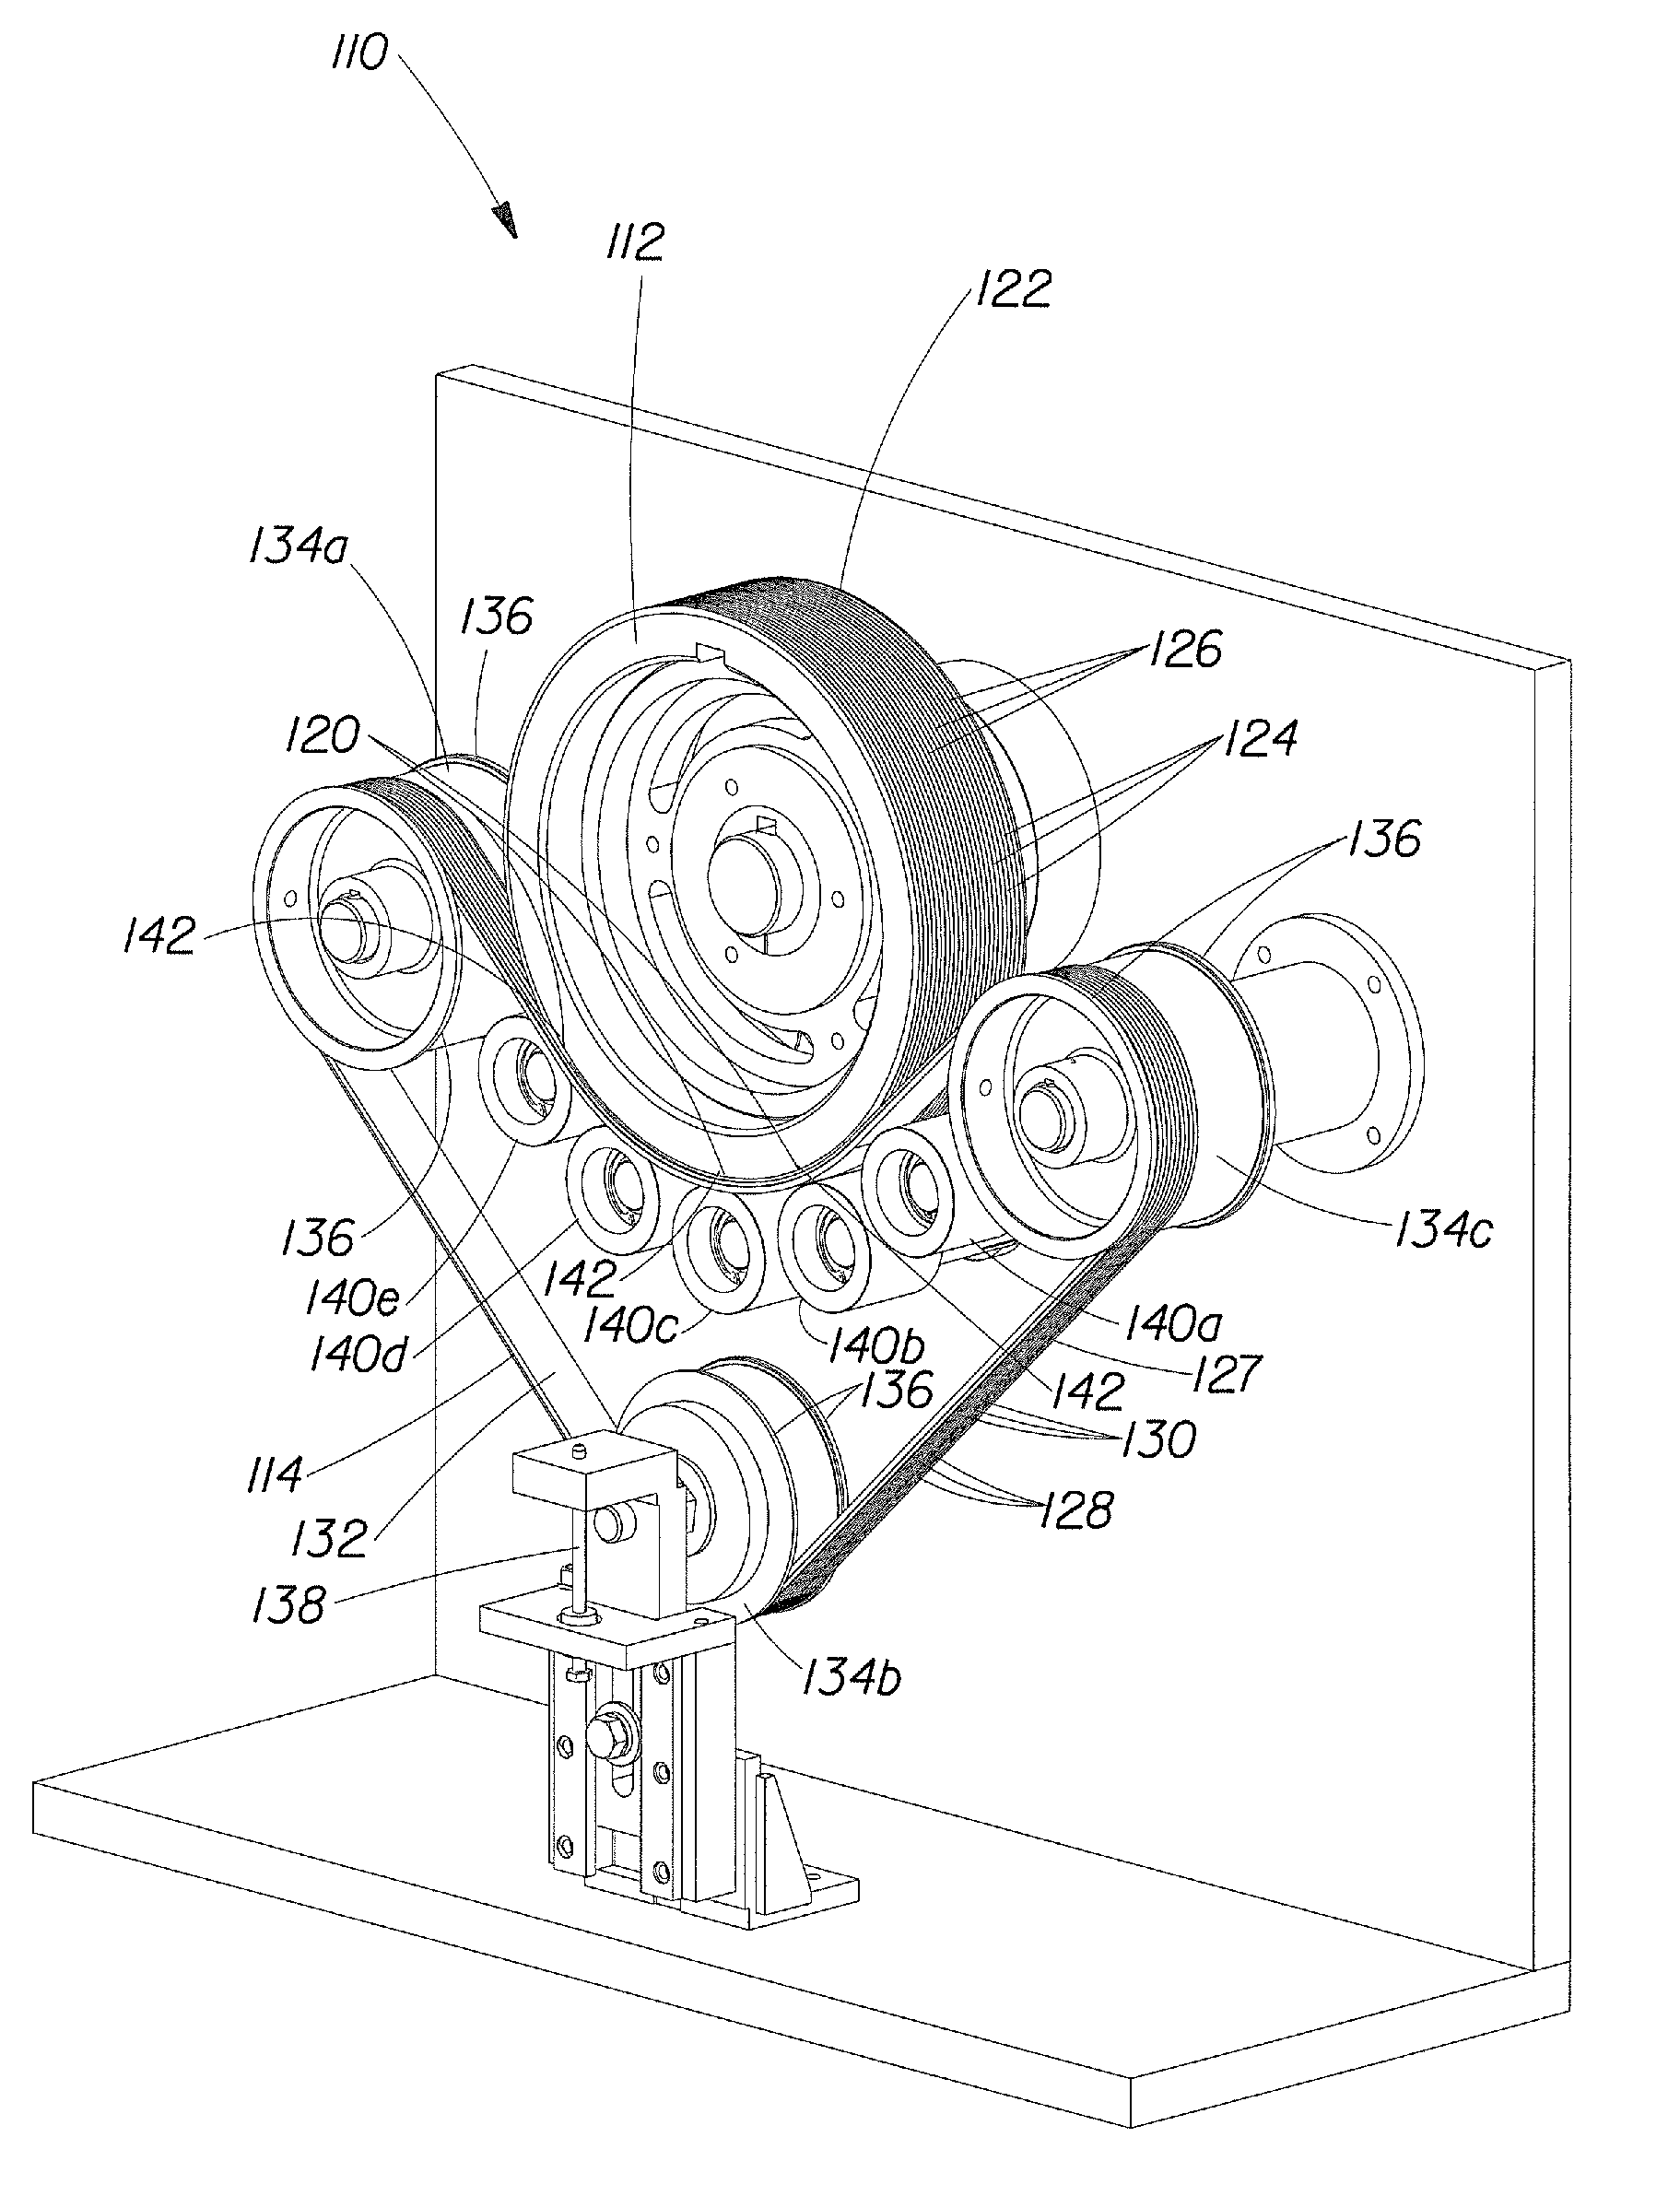 Method and Apparatus for Incrementally Stretching a Web